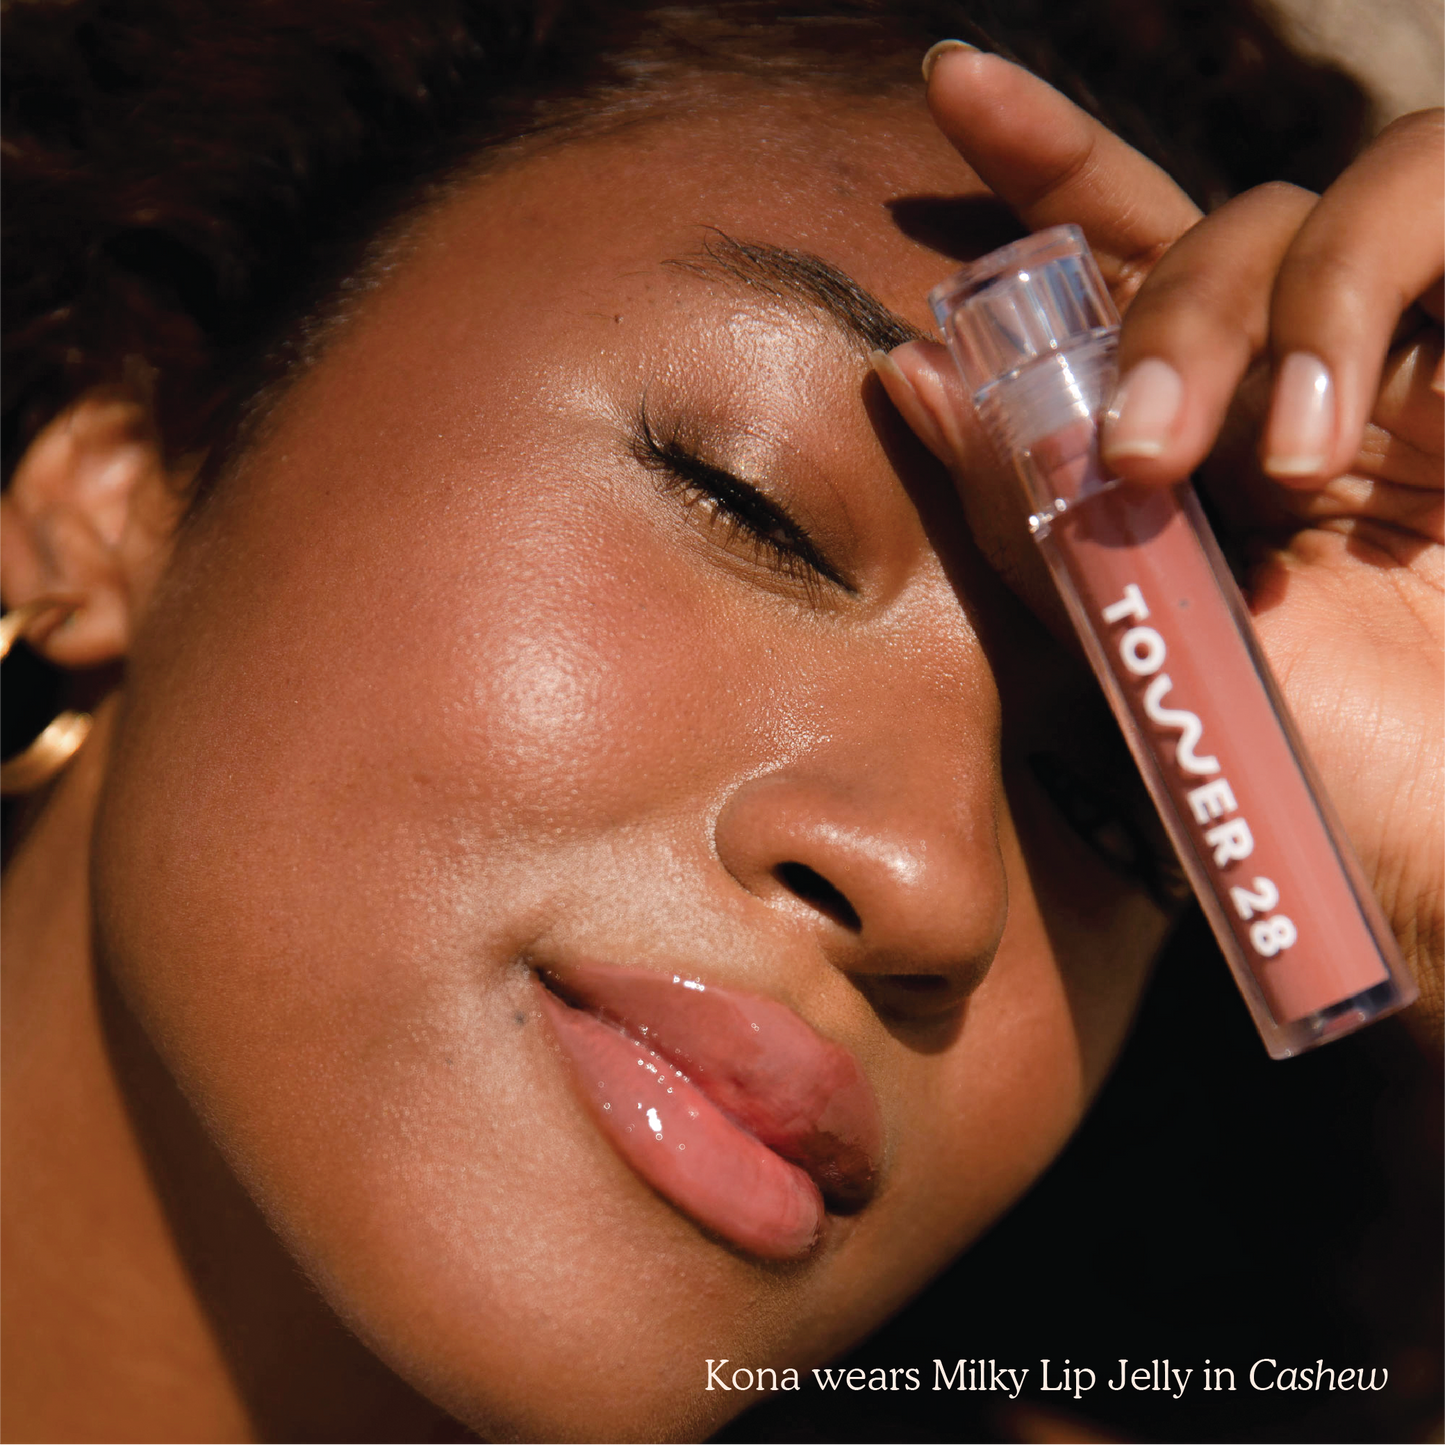 Cashew [Closeup photo of a girl smiling with very glossy lips, wearing the Tower 28 Beauty ShineOn Milky Lip Jelly shade in Cashew (a milky rosy-brown), and holding an acrylic slim lip gloss tube with "Tower 28" logo over her eye]